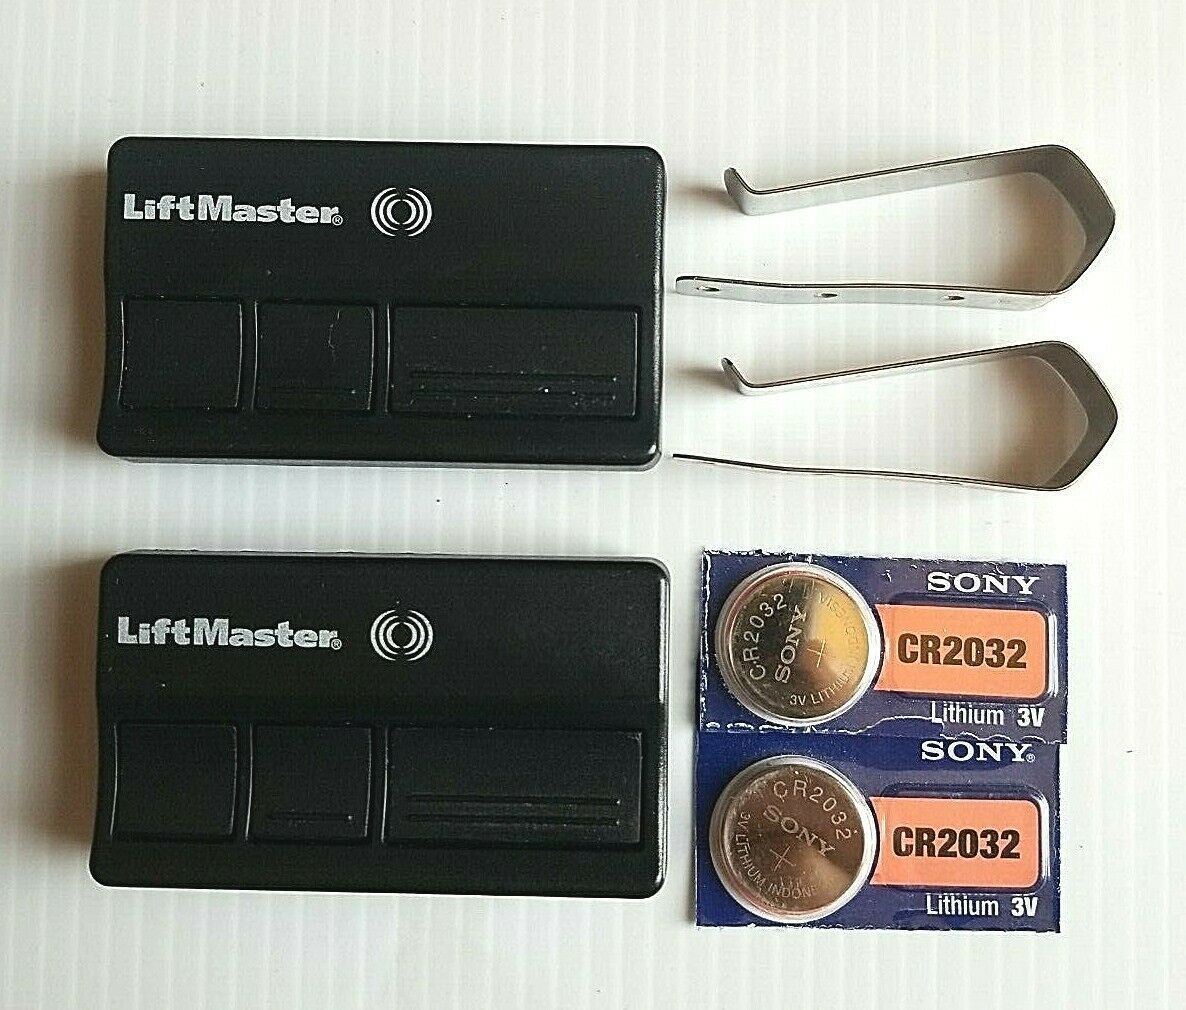 2 Genuine OEM Chamberlain Liftmaster 373LM 3 Button Remotes w/Clips & Batteries